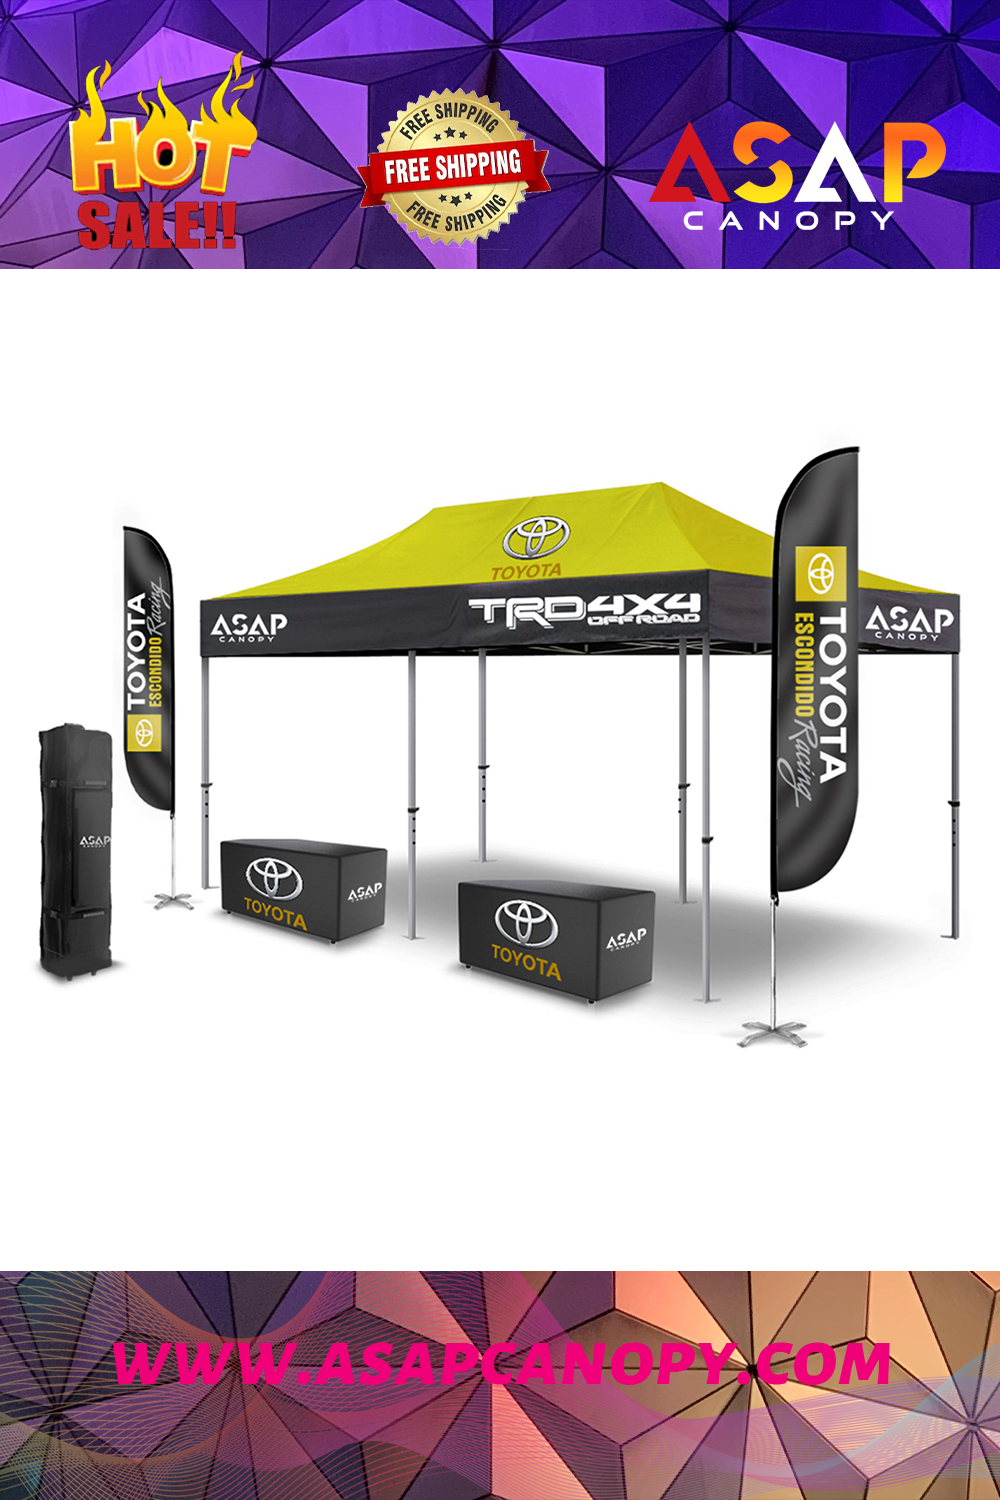 Custom Canopy Covers: Taking 10x20ft Canopy Tents to New Levels of Functionality